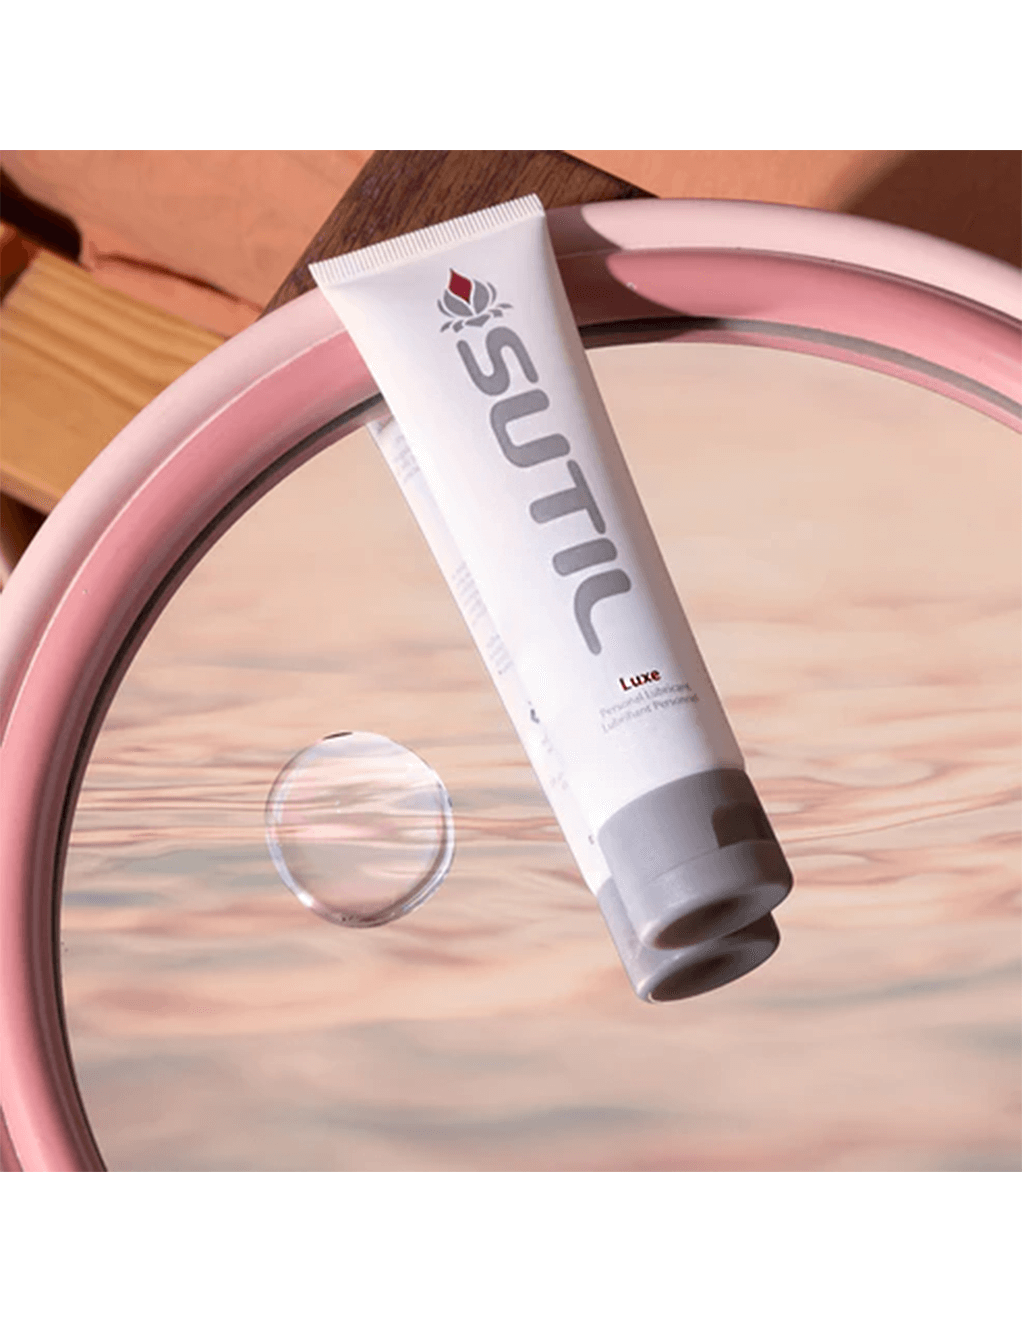 SUTIL Luxe Water Based Lubricant - Editorial